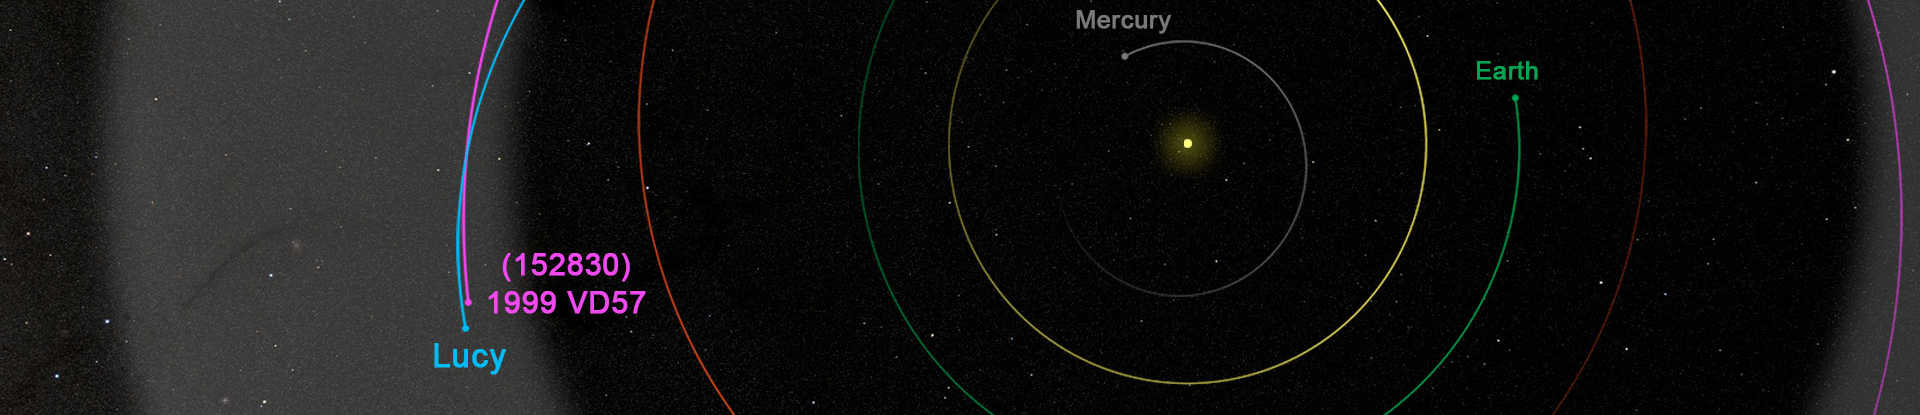 Press Release: SwRI-led Lucy team announces new asteroid target